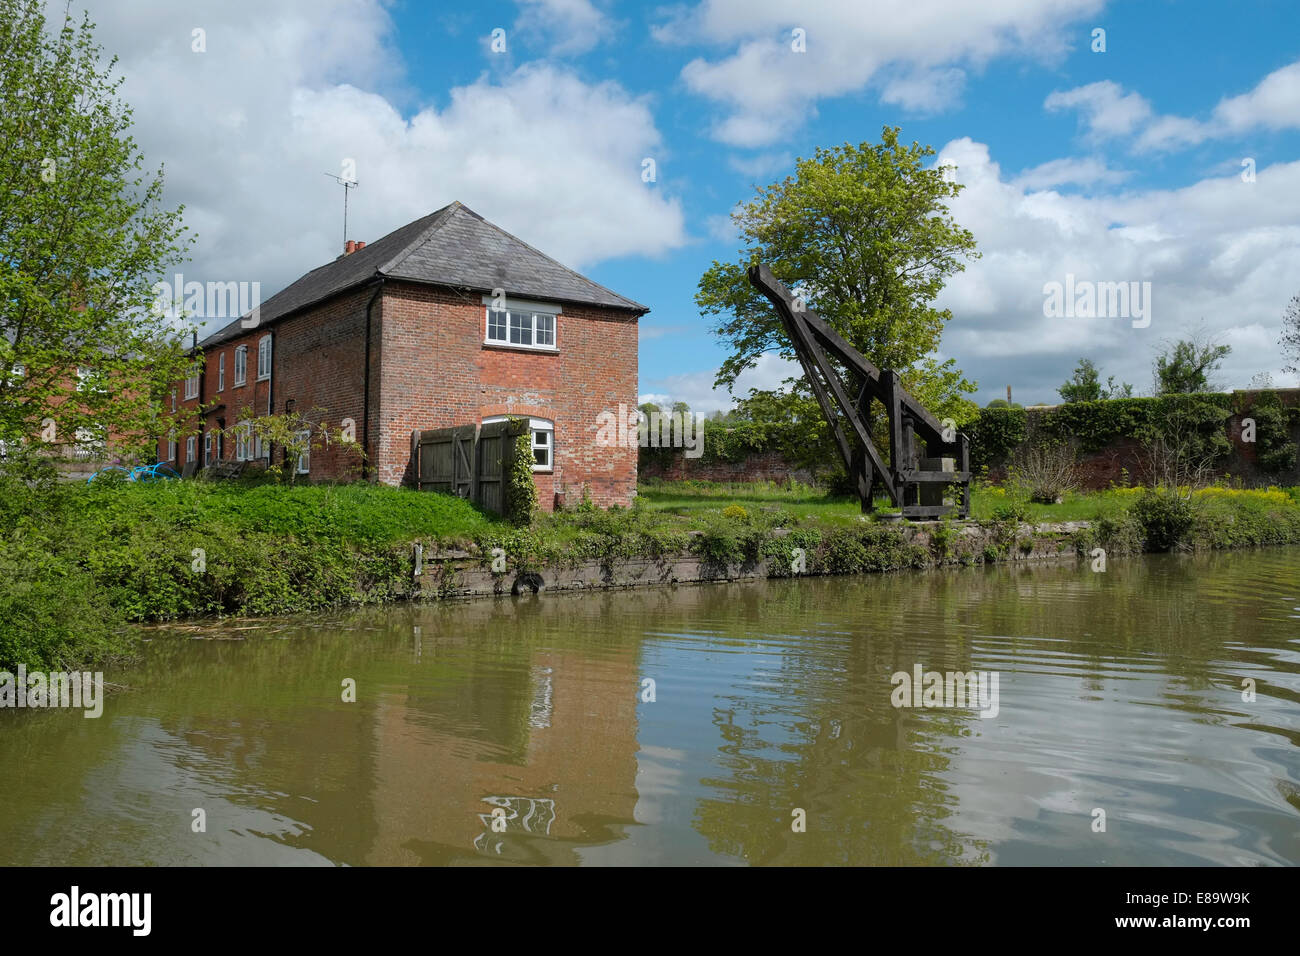 Burbage Wharf on the Kennet and Avon Canal. Burbage, Vale of Pewsey, Wiltshire, England. Stock Photo